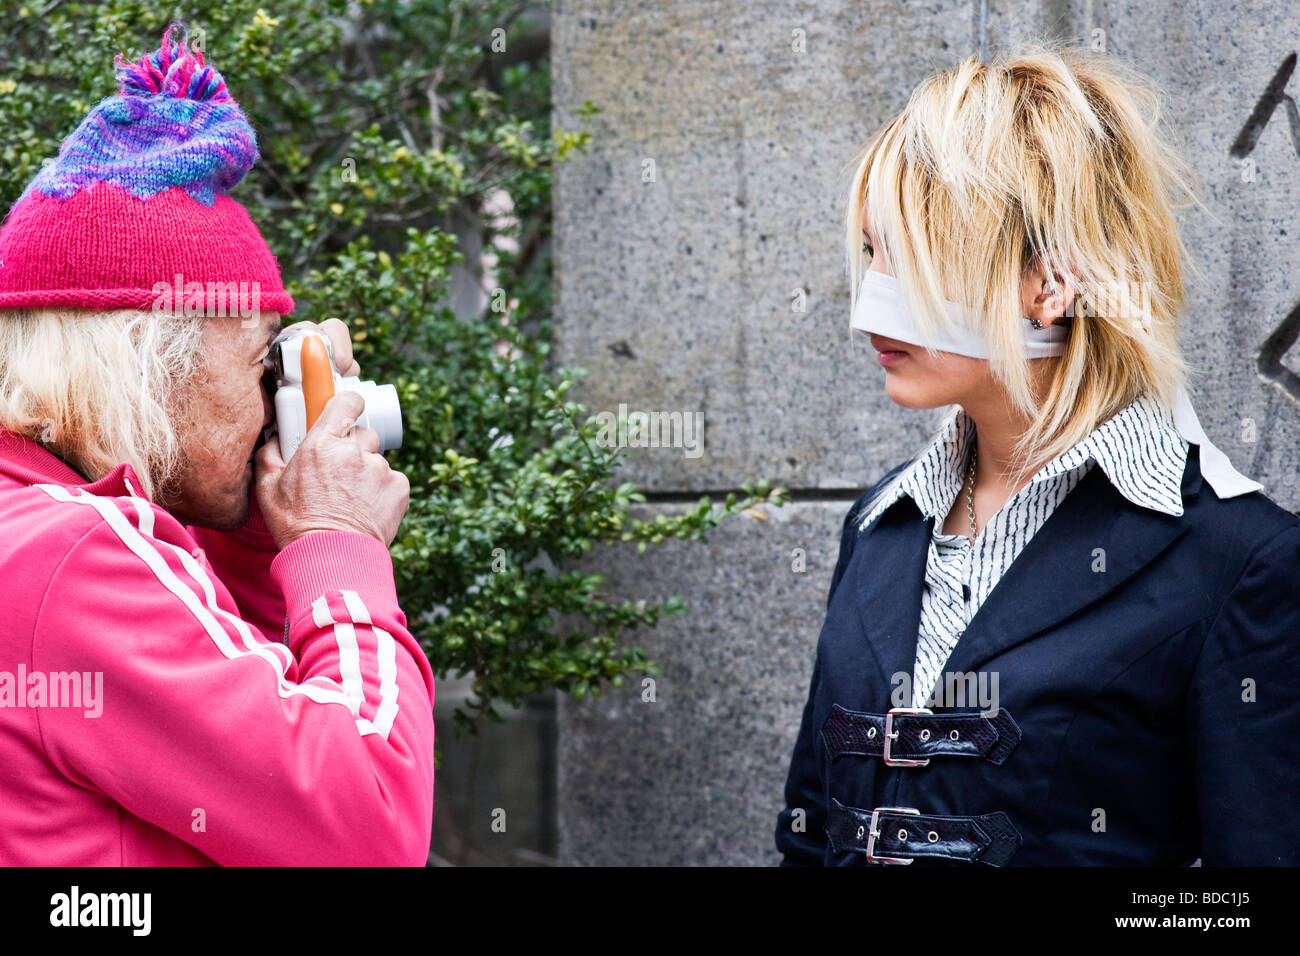 A man taking a photograph of a young person in fancy dress Harajuku, Tokyo, Japan Stock Photo